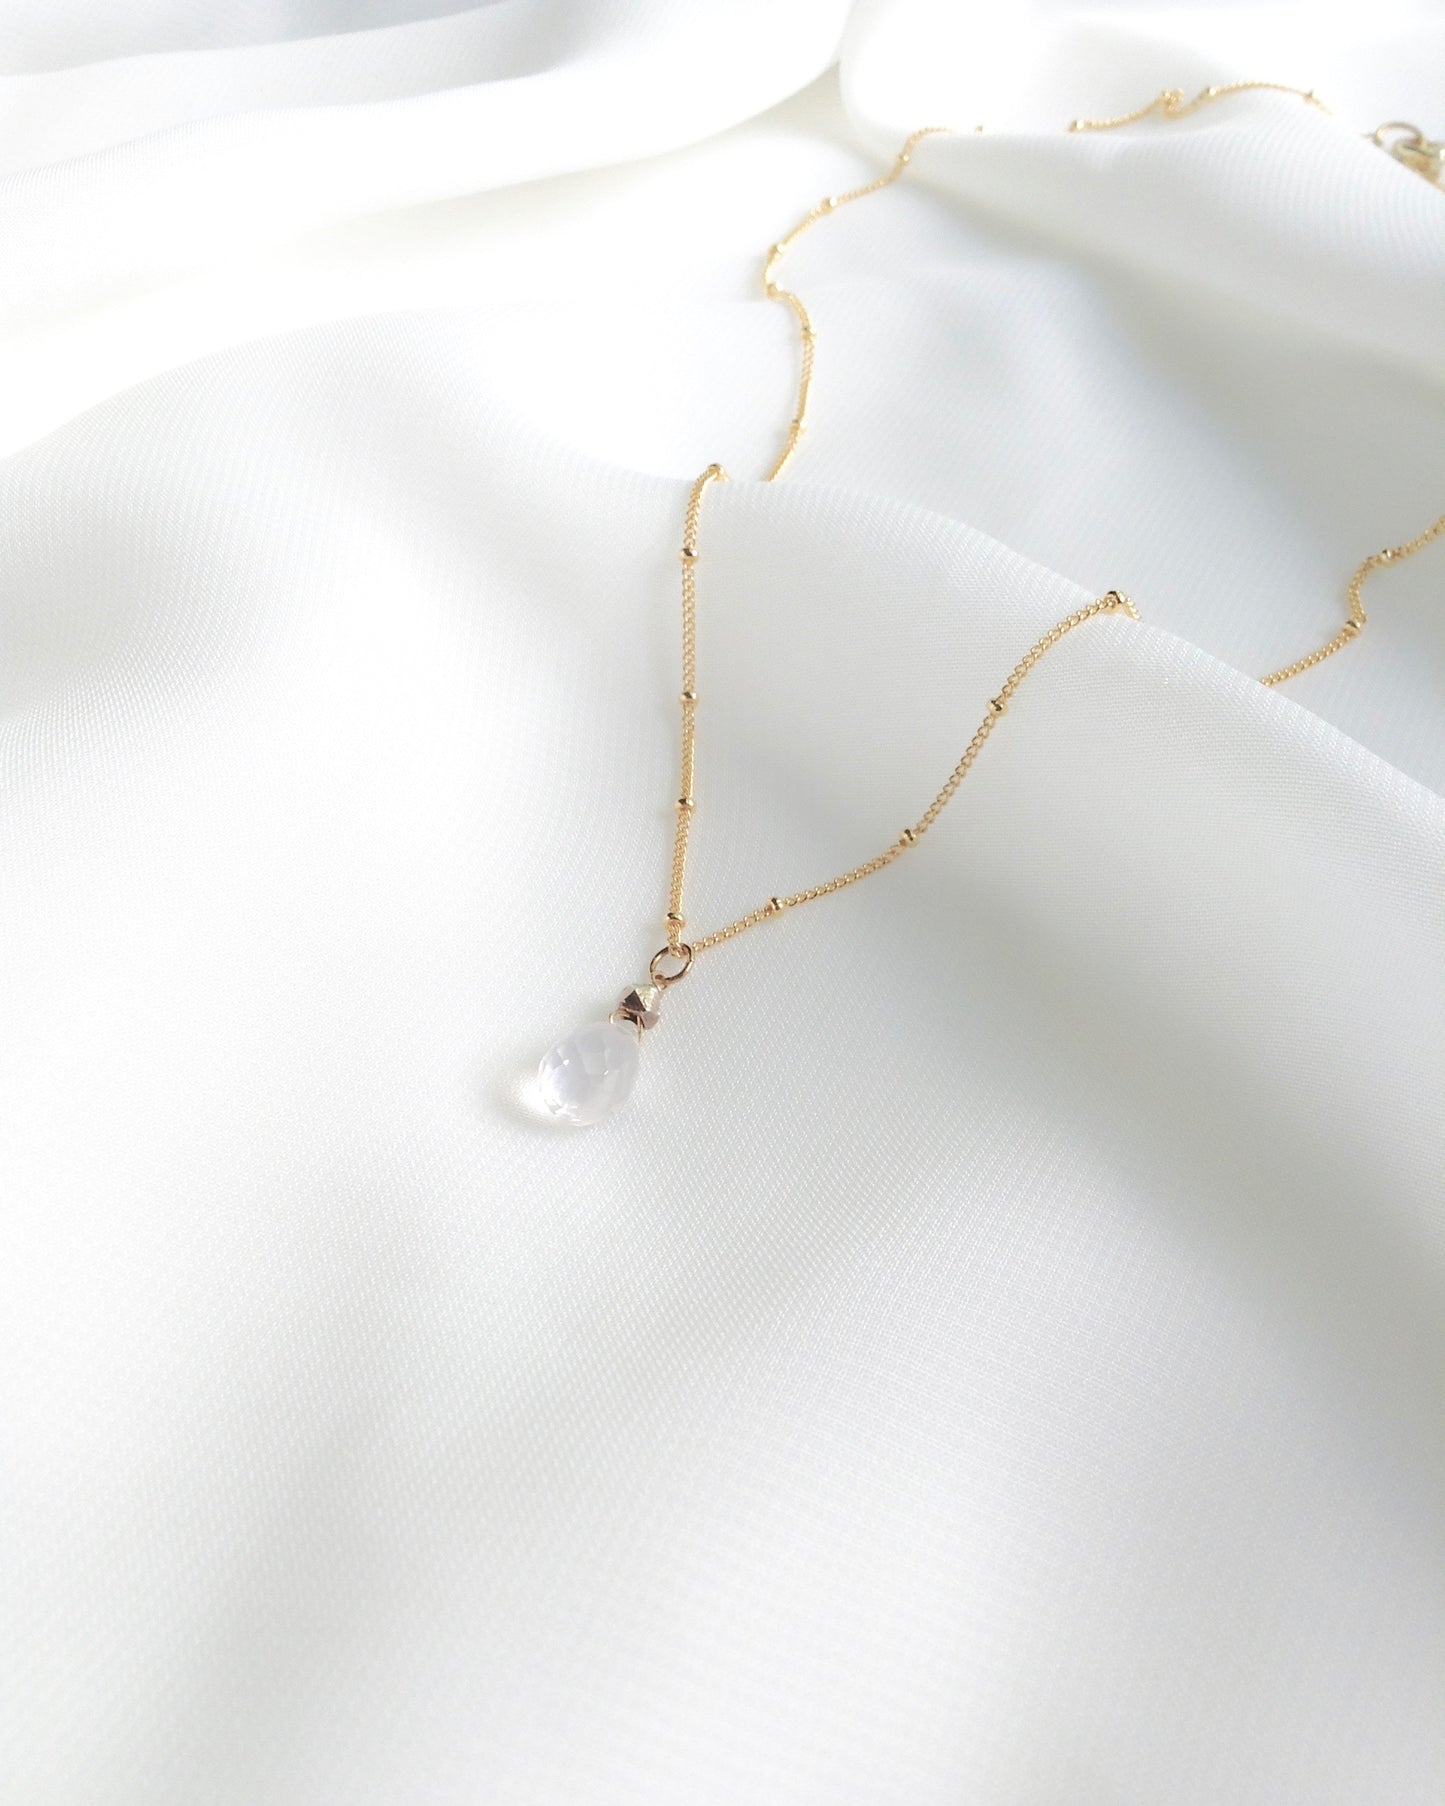 Delicate Rose Quartz Satellite Chain Necklace in Gold Filled or Sterling Silver | IB Jewelry